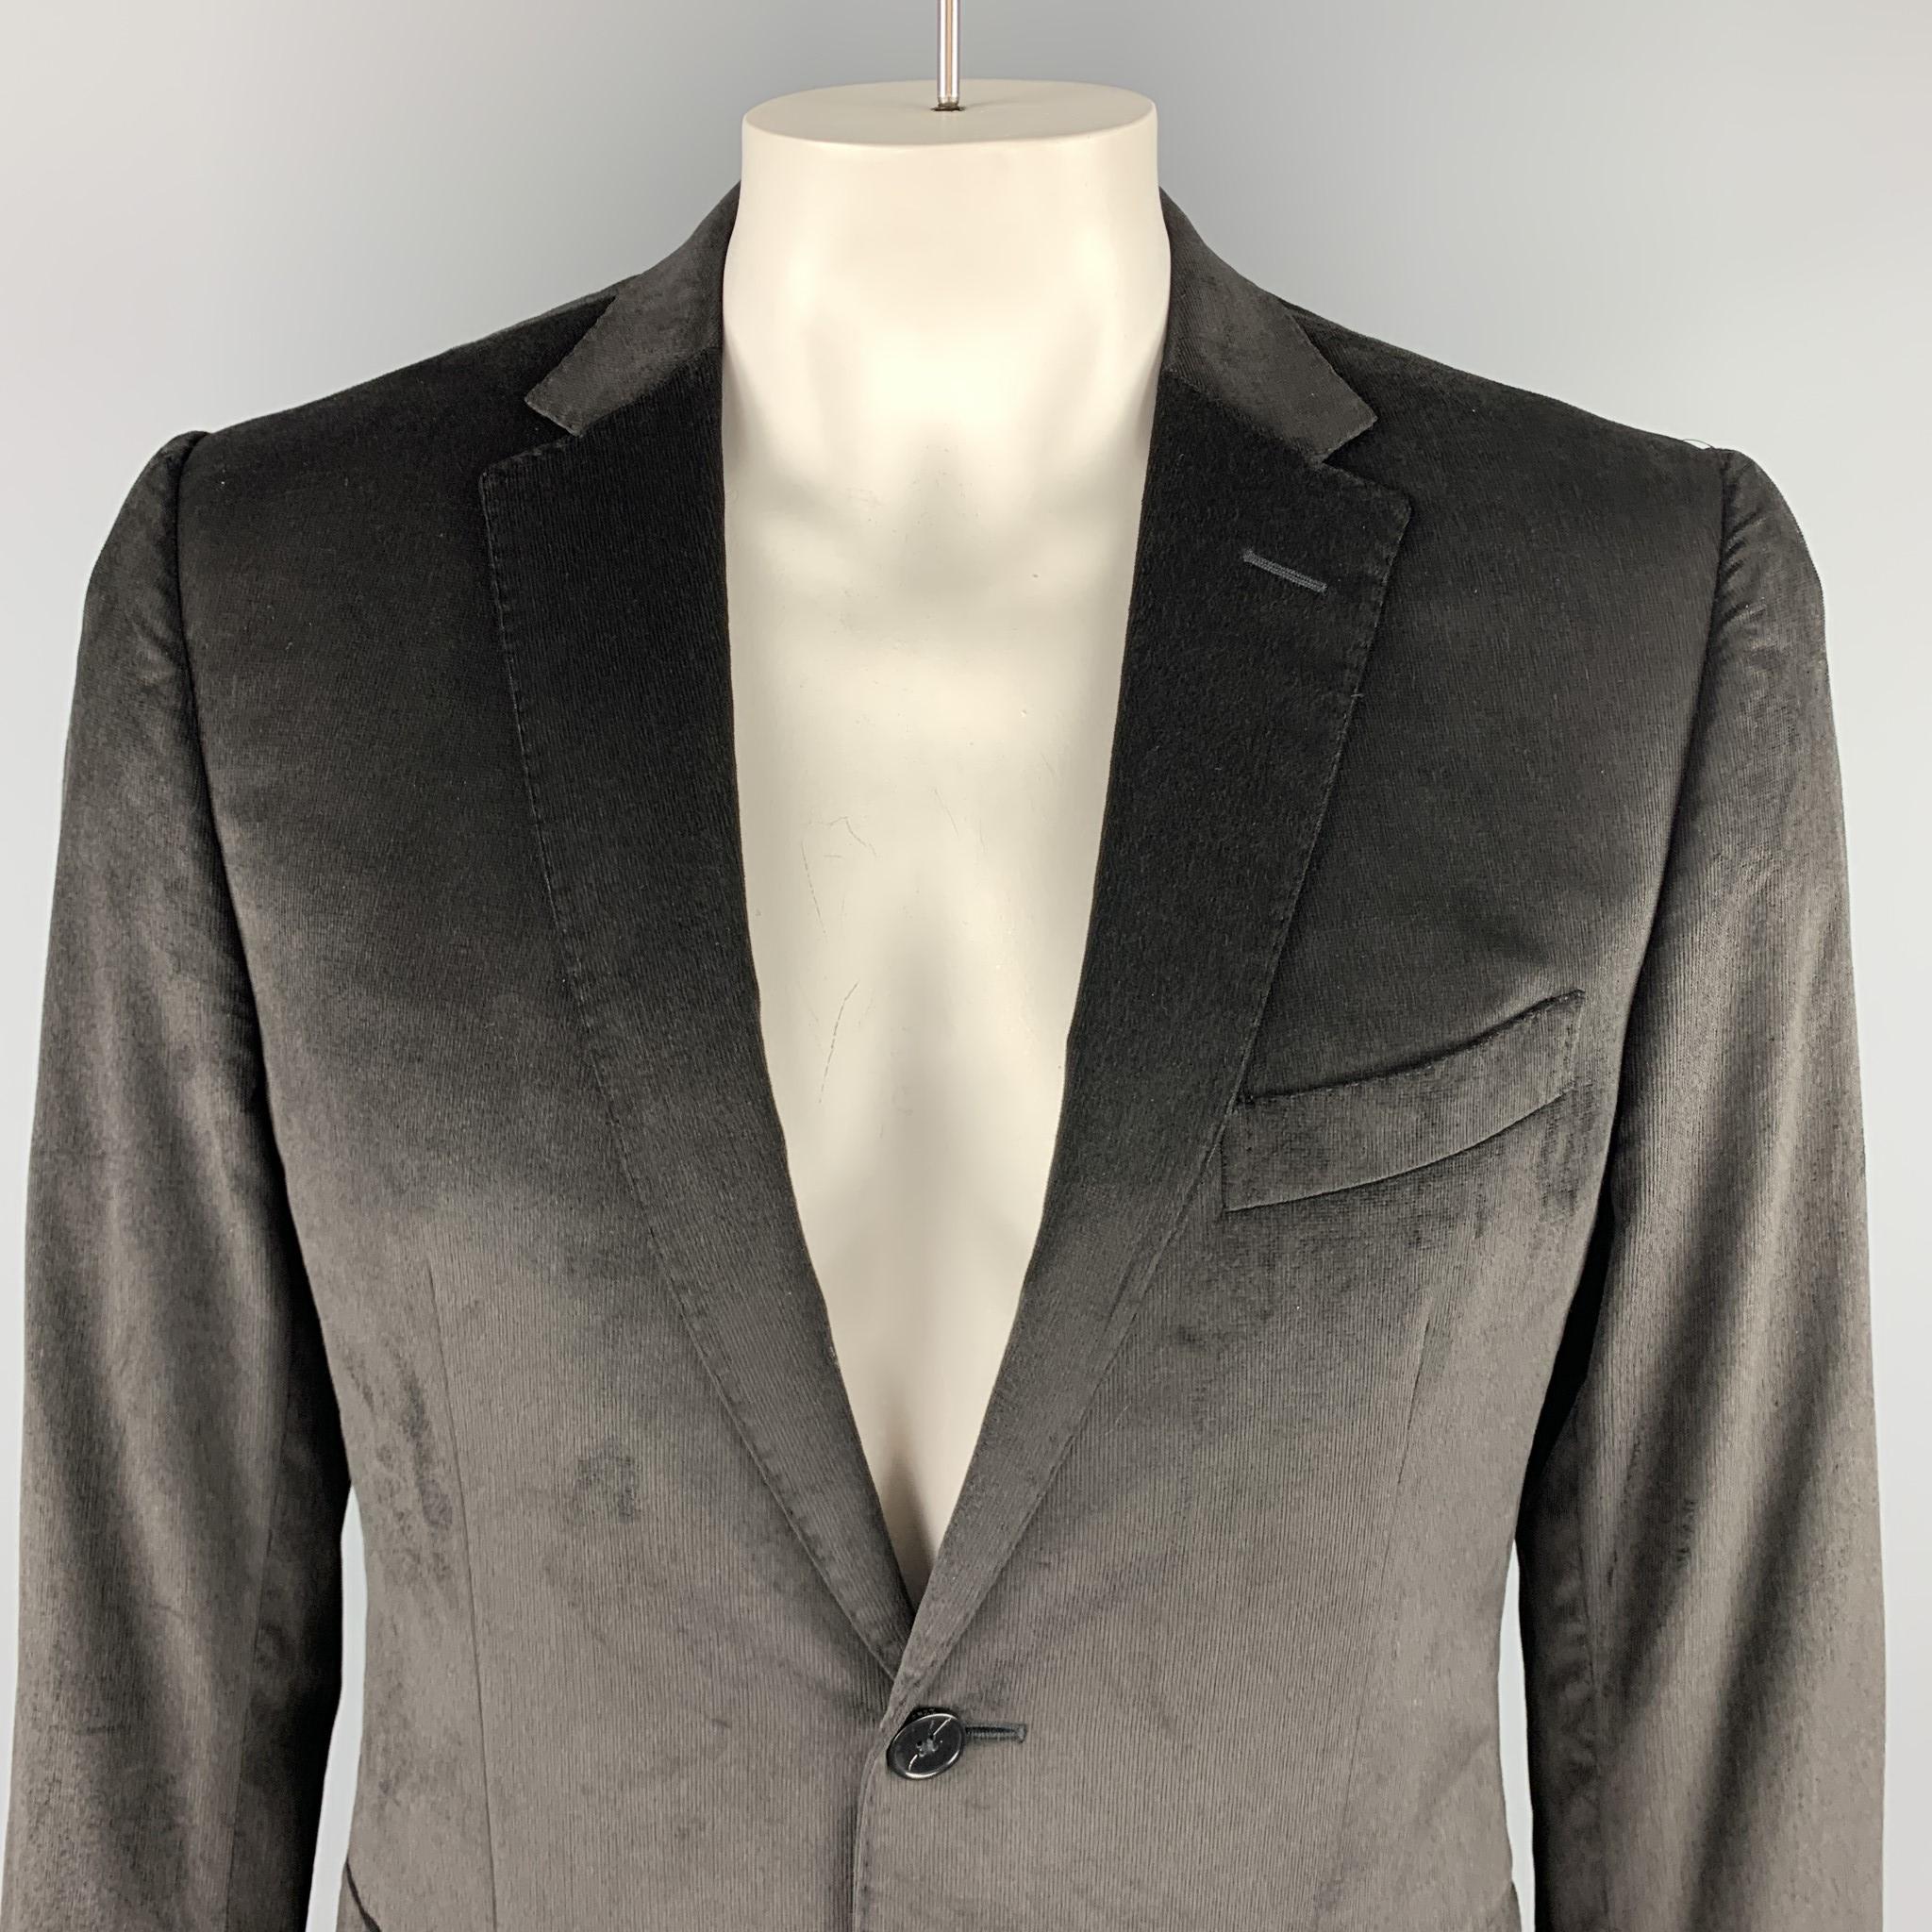 Z ZEGNA sport coat comes in black velvet with a notch lapel, single breasted, two button front, and double vented back. 

Very Good Pre-Owned Condition.
Marked: IT 50 R

Measurements:

Shoulder: 18 in.
Chest: 42 in.
Sleeve: 25 in.
Length: 30.5 in.